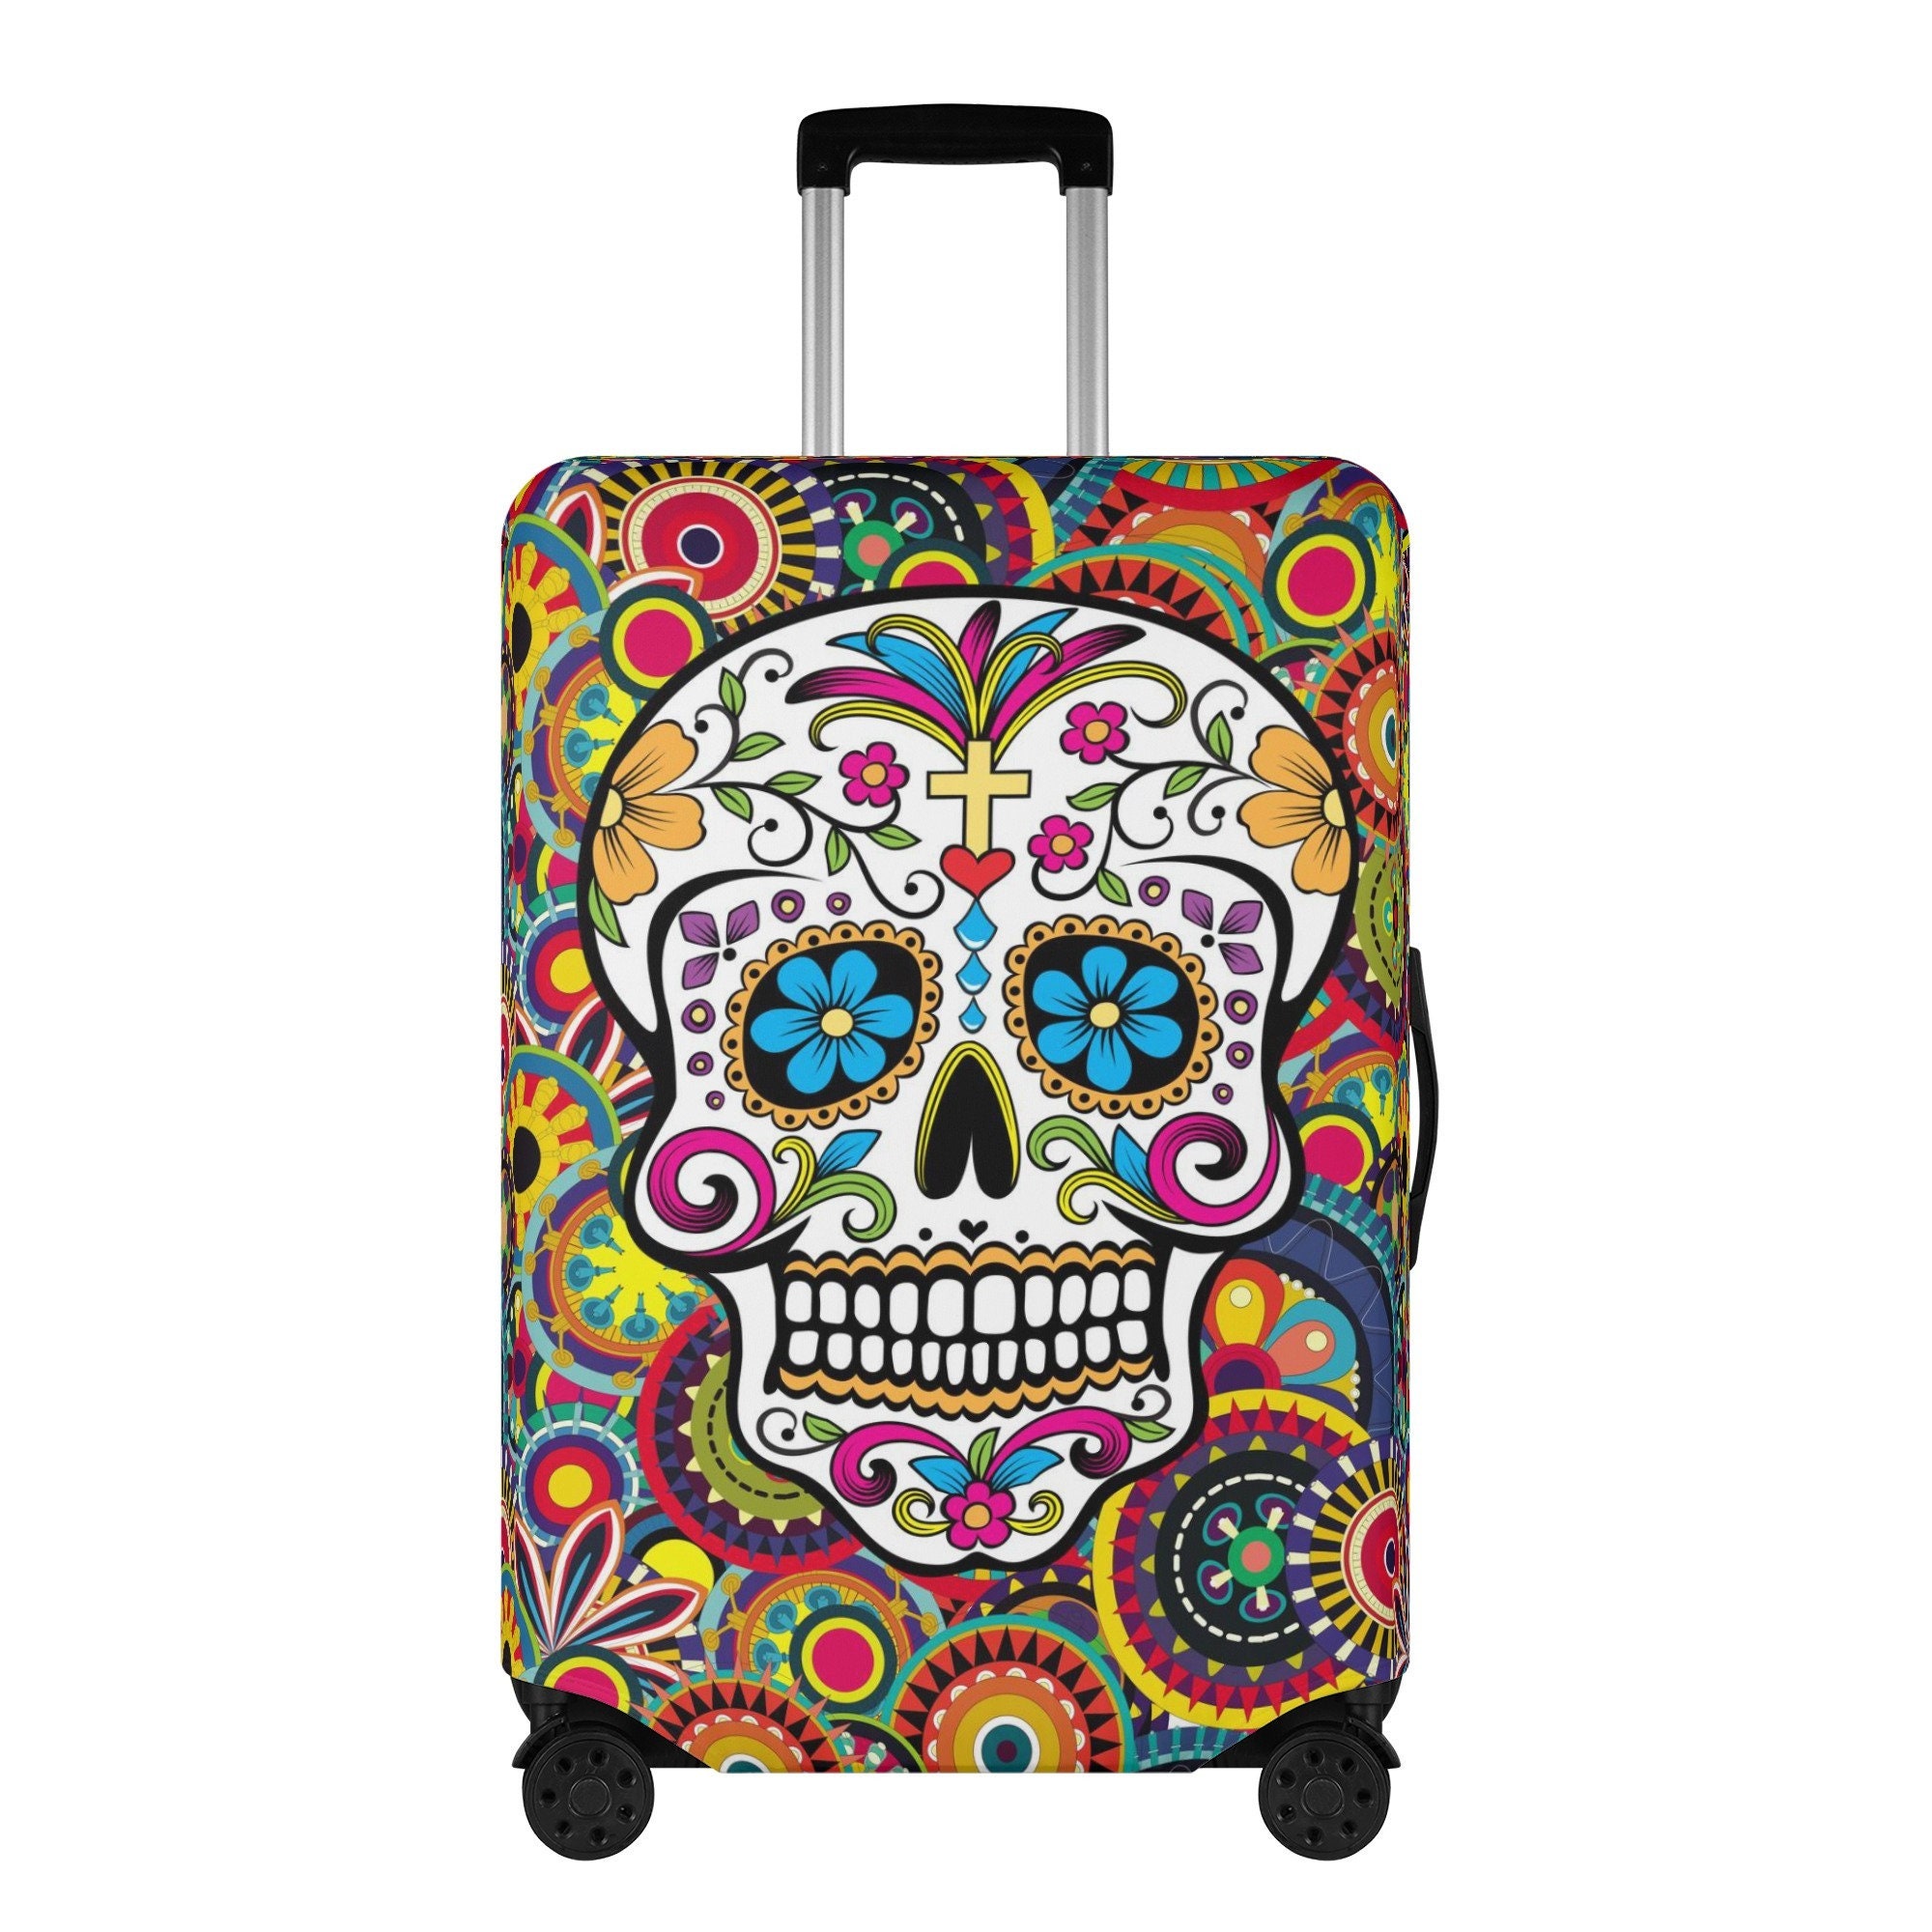 Floral sugar skull luggage cover, travel luggage cover